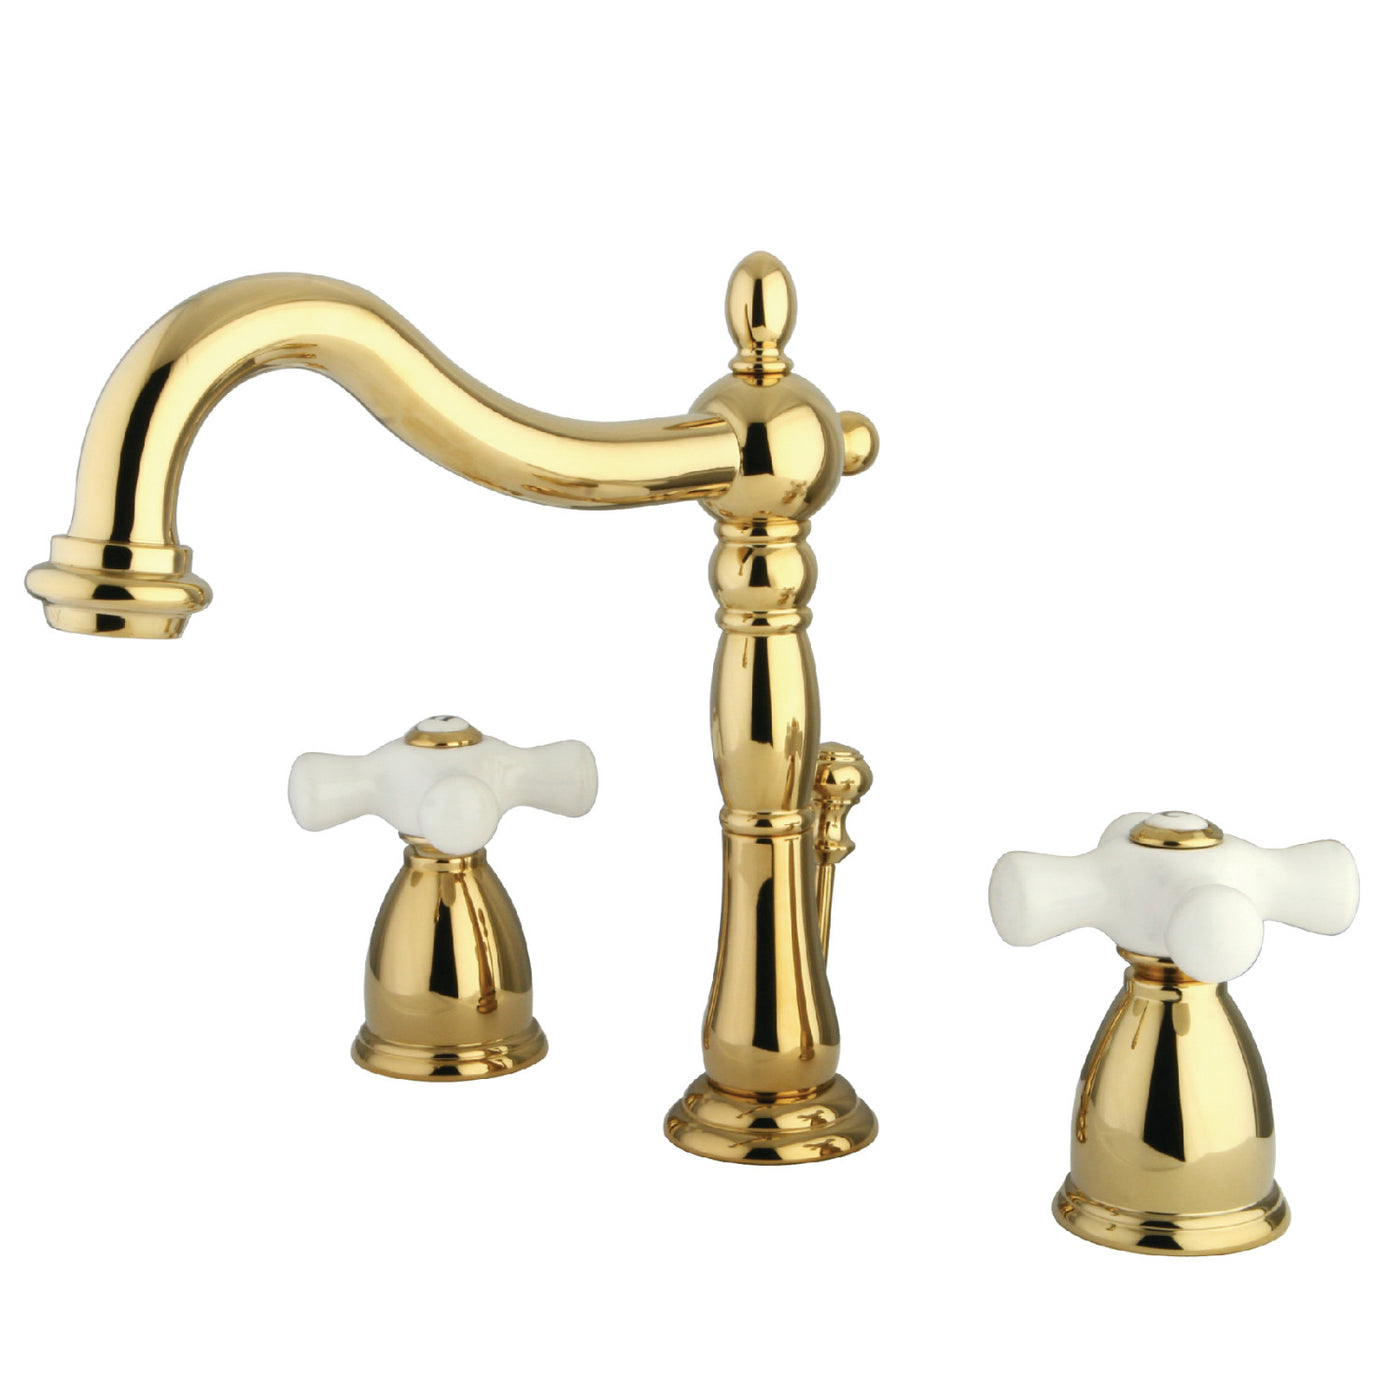 Elements of Design EB1972PX Widespread Bathroom Faucet with Brass Pop-Up, Polished Brass